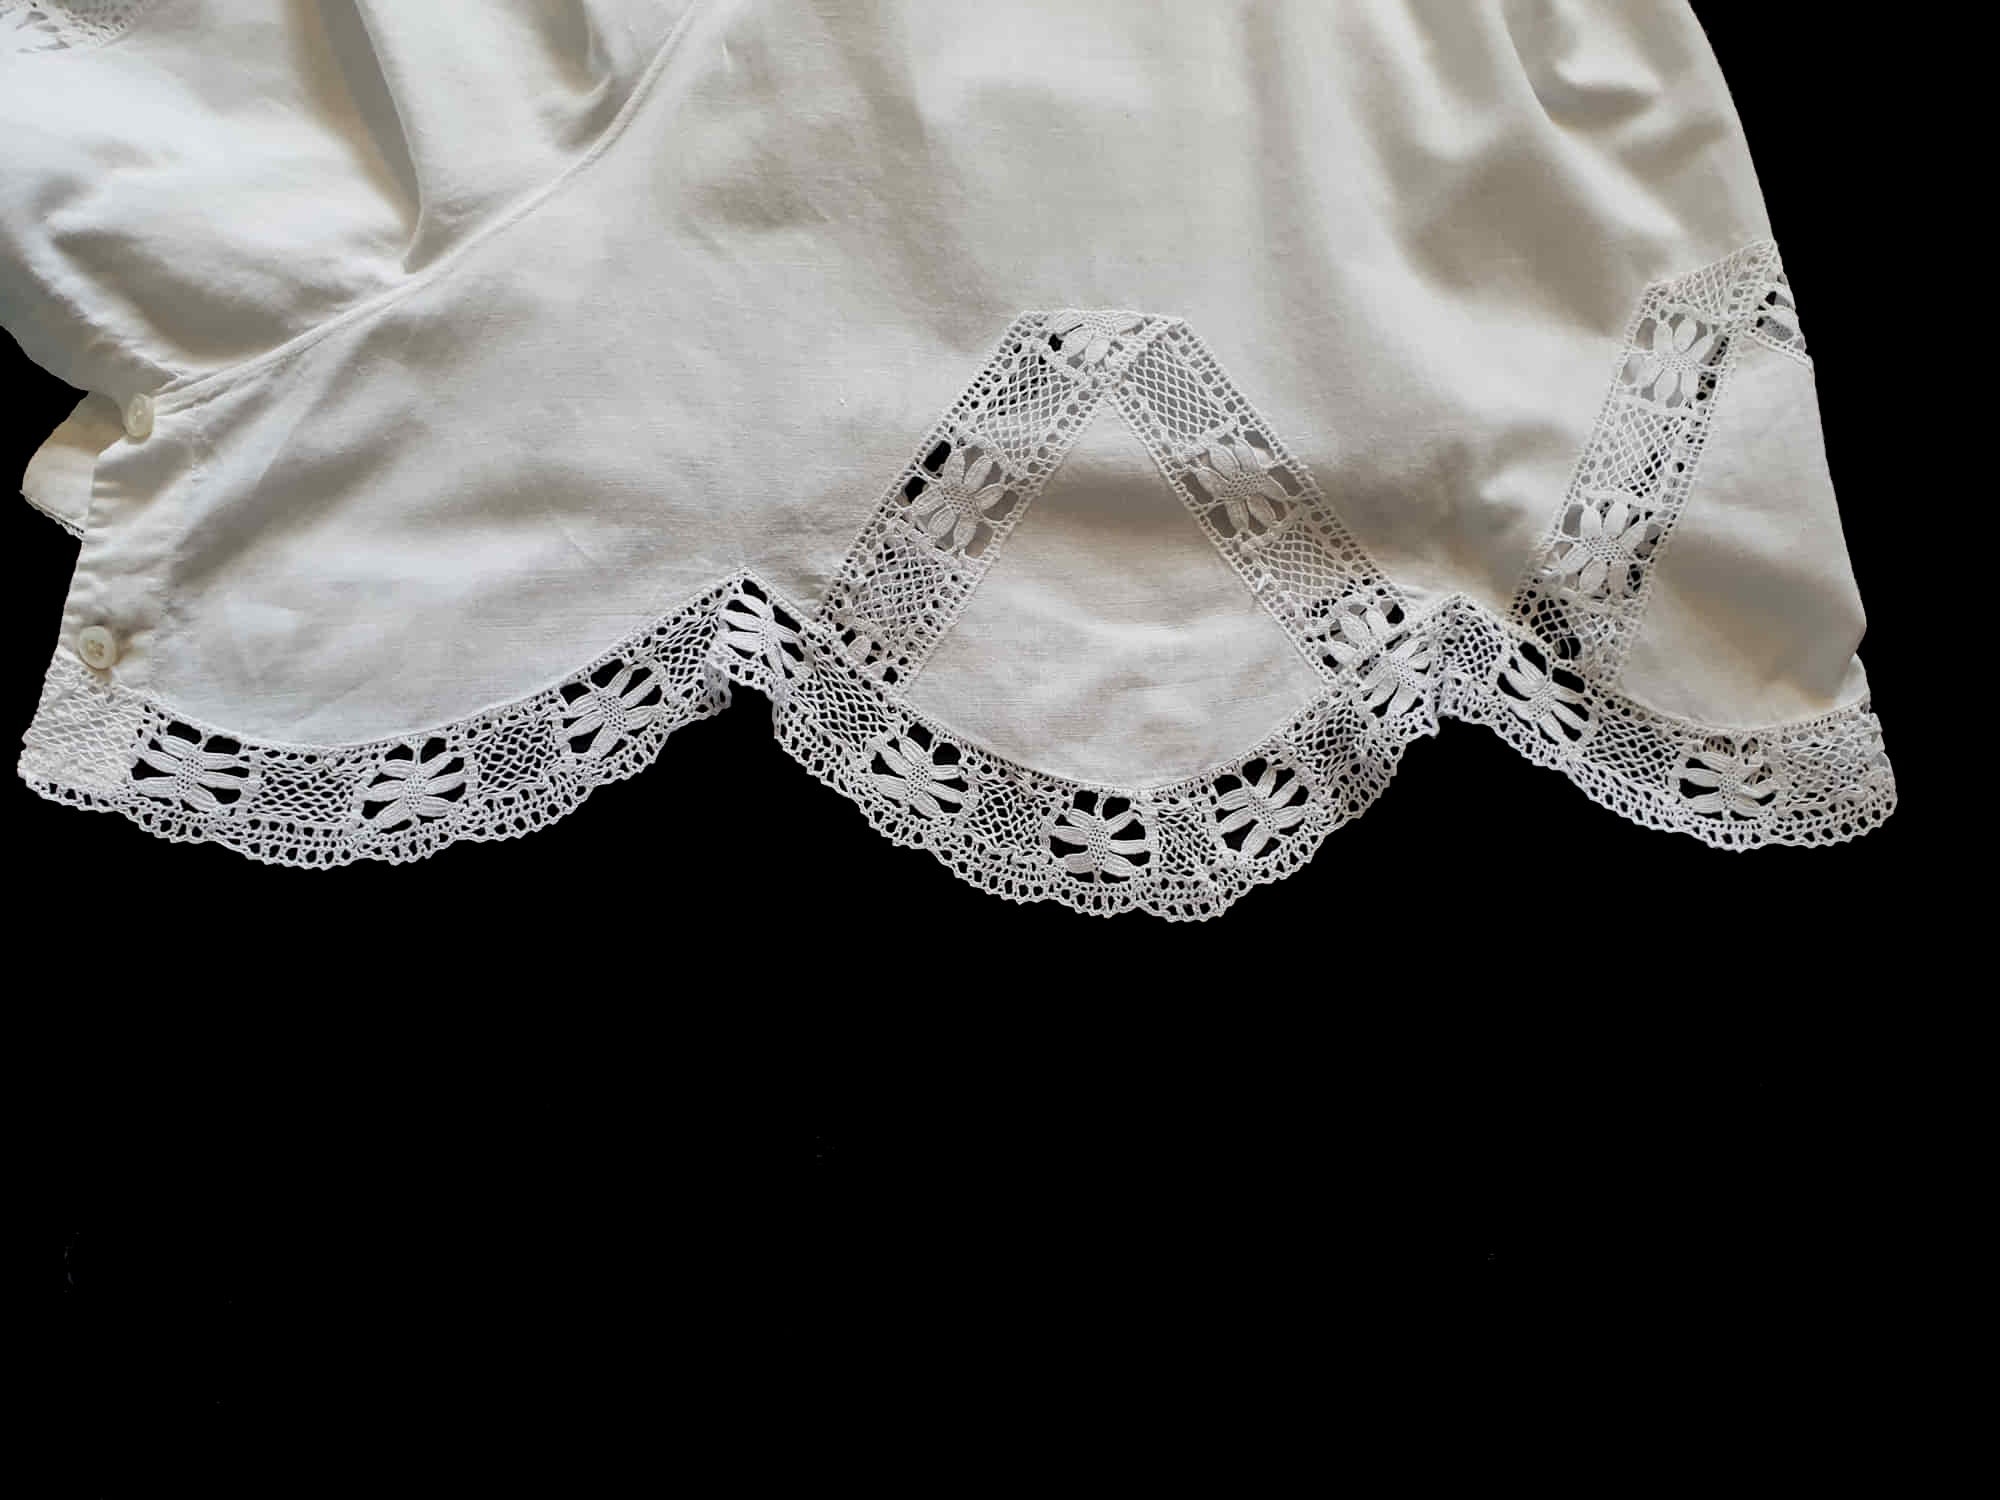 antique white lacy cotton camiknickers step ins combinations